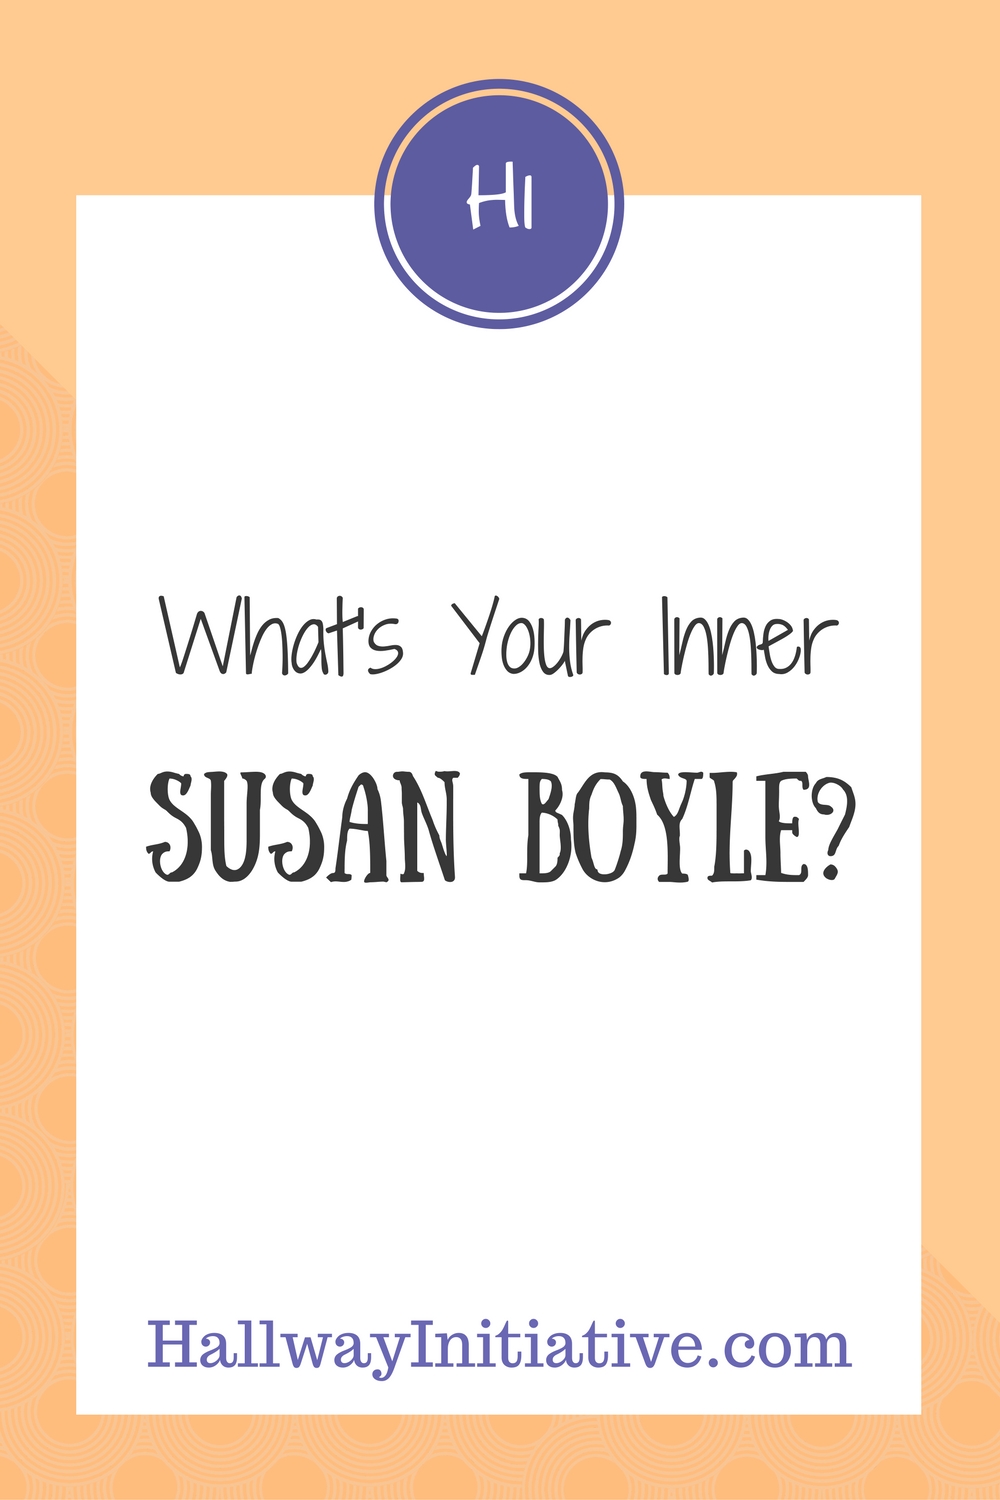 What's your inner Susan Boyle?